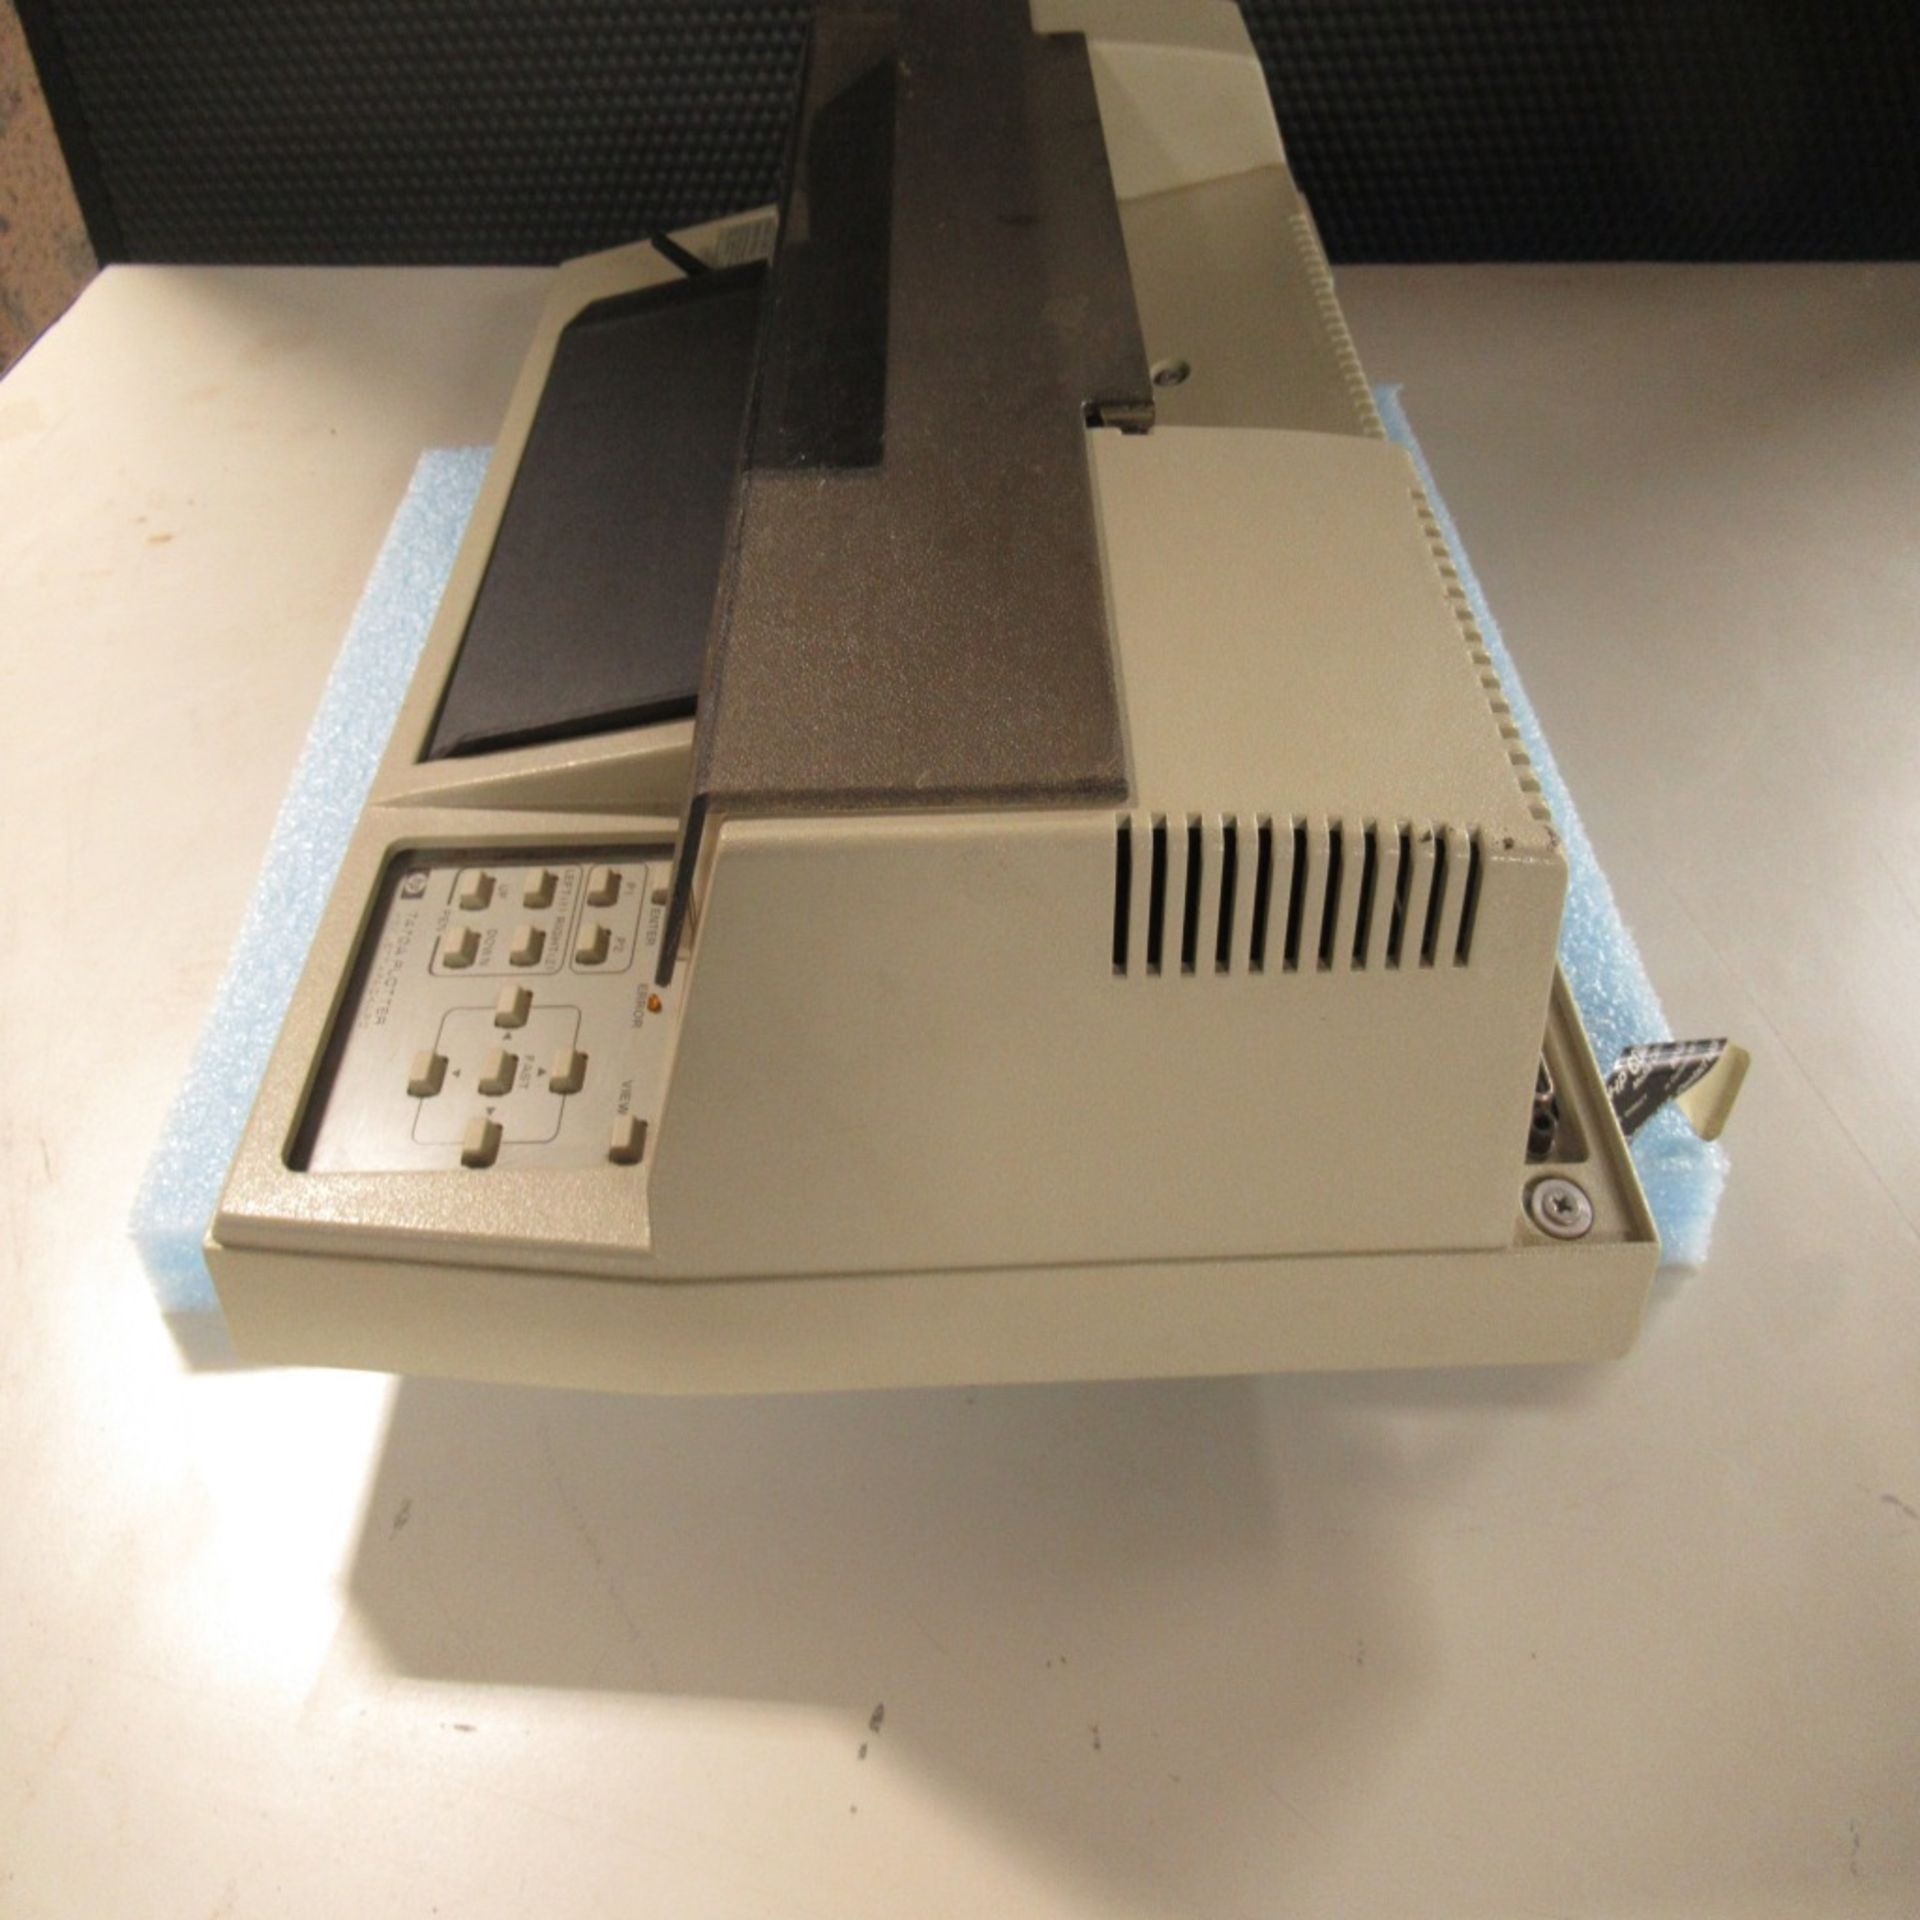 PHOTON SNAP SHOT MODEL 6000 *POWERS ON* NO SCREEN DISPLAY; FARNELL AP20-80 REGULATED POWER SUPPLY * - Image 153 of 222